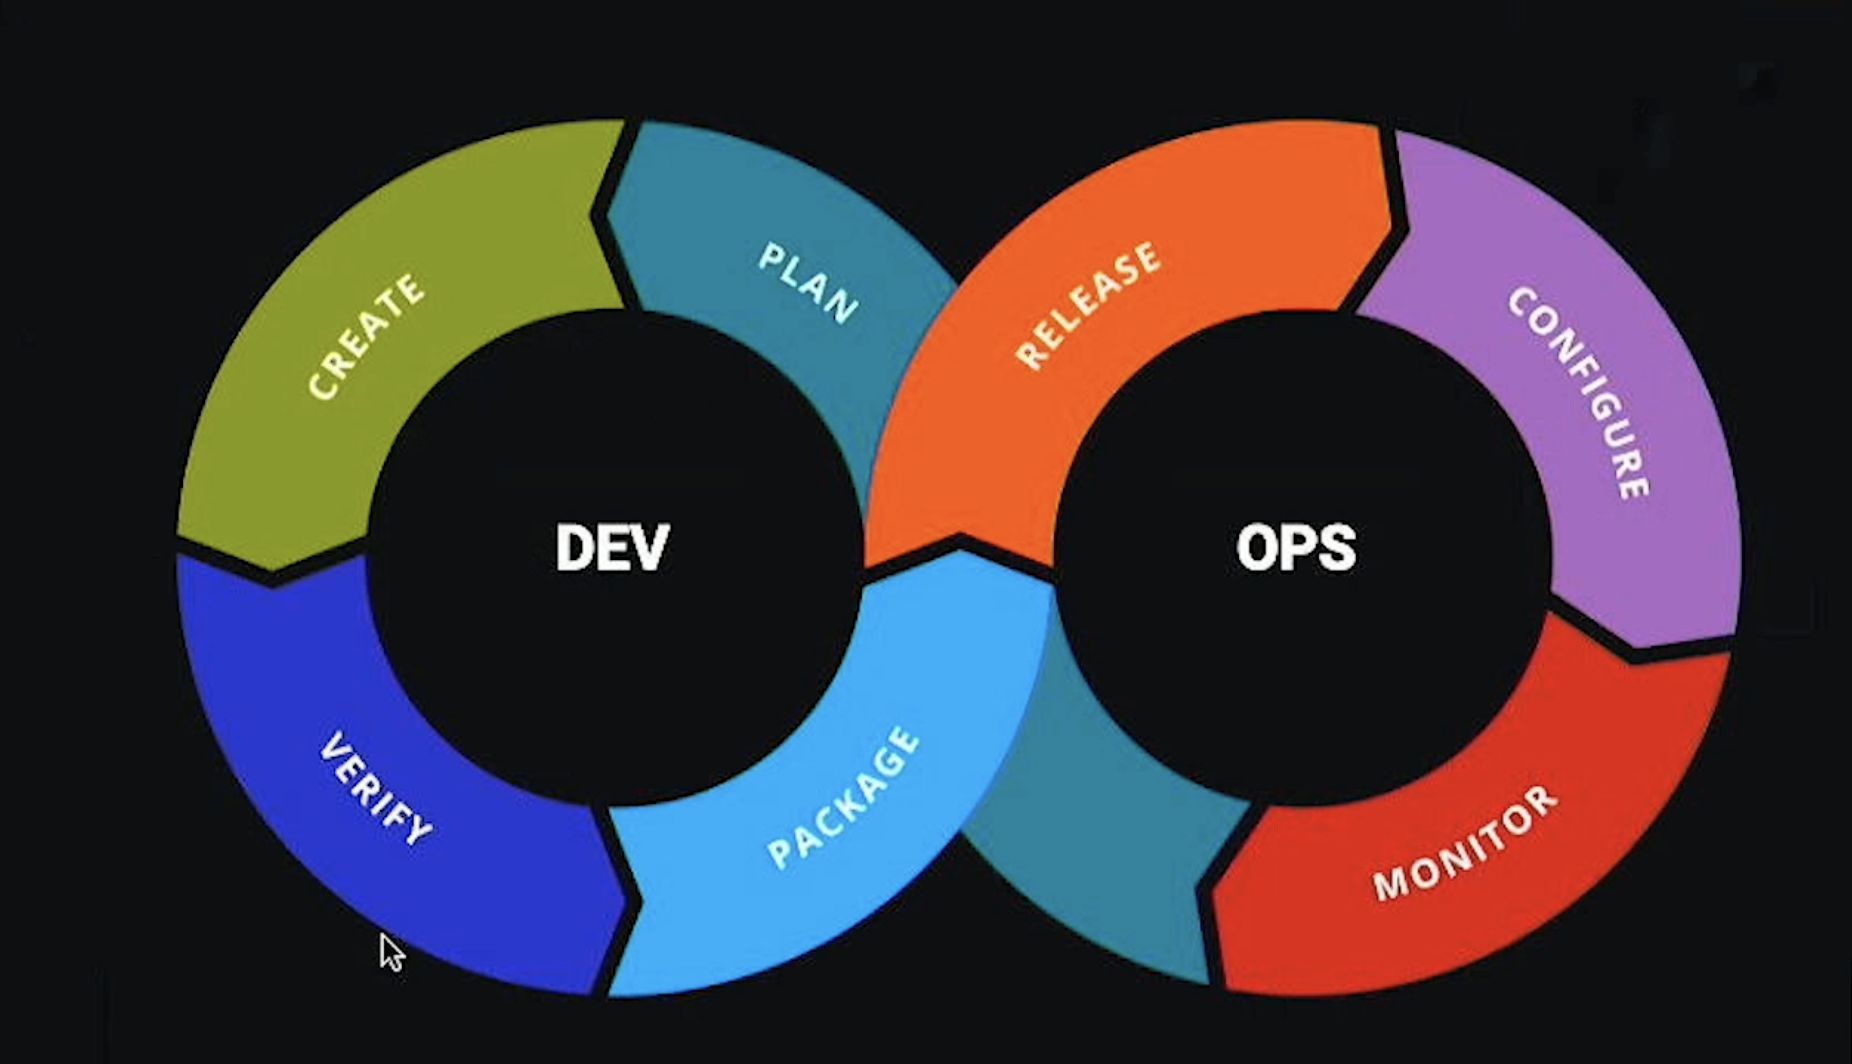 The DevOps Cycle